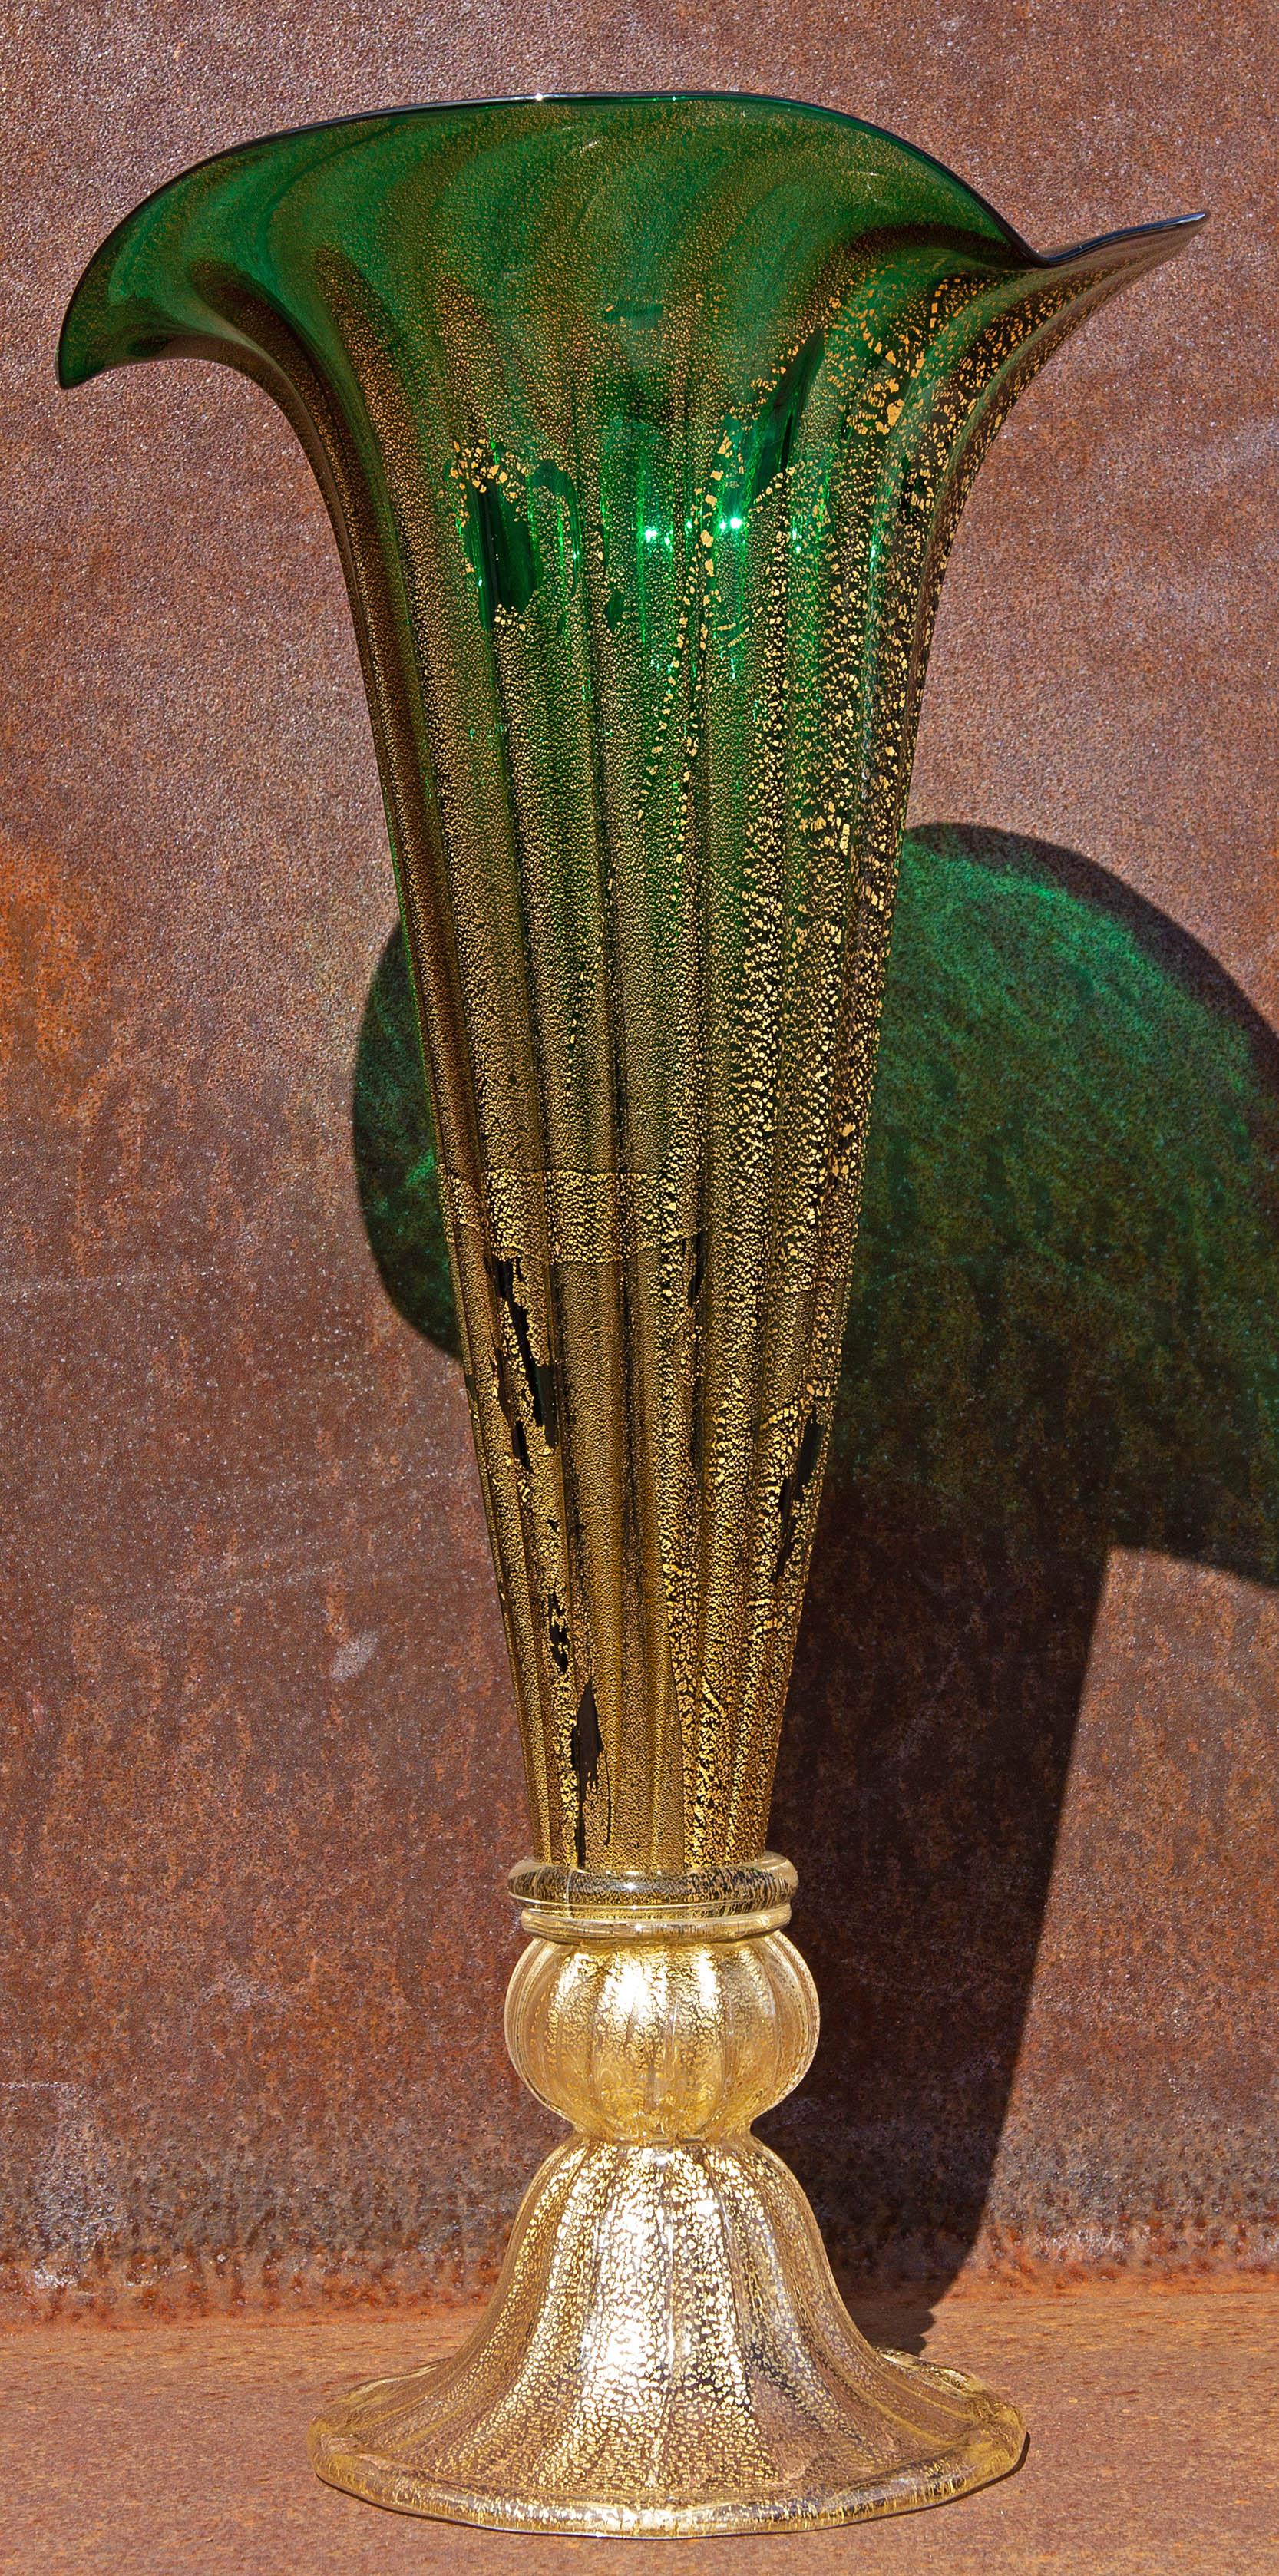 Monumental sculptural Venetian glass vase. Emerald green glass with infused 24-karat gold flakes, mid-20th century. Measures: 20 1/4